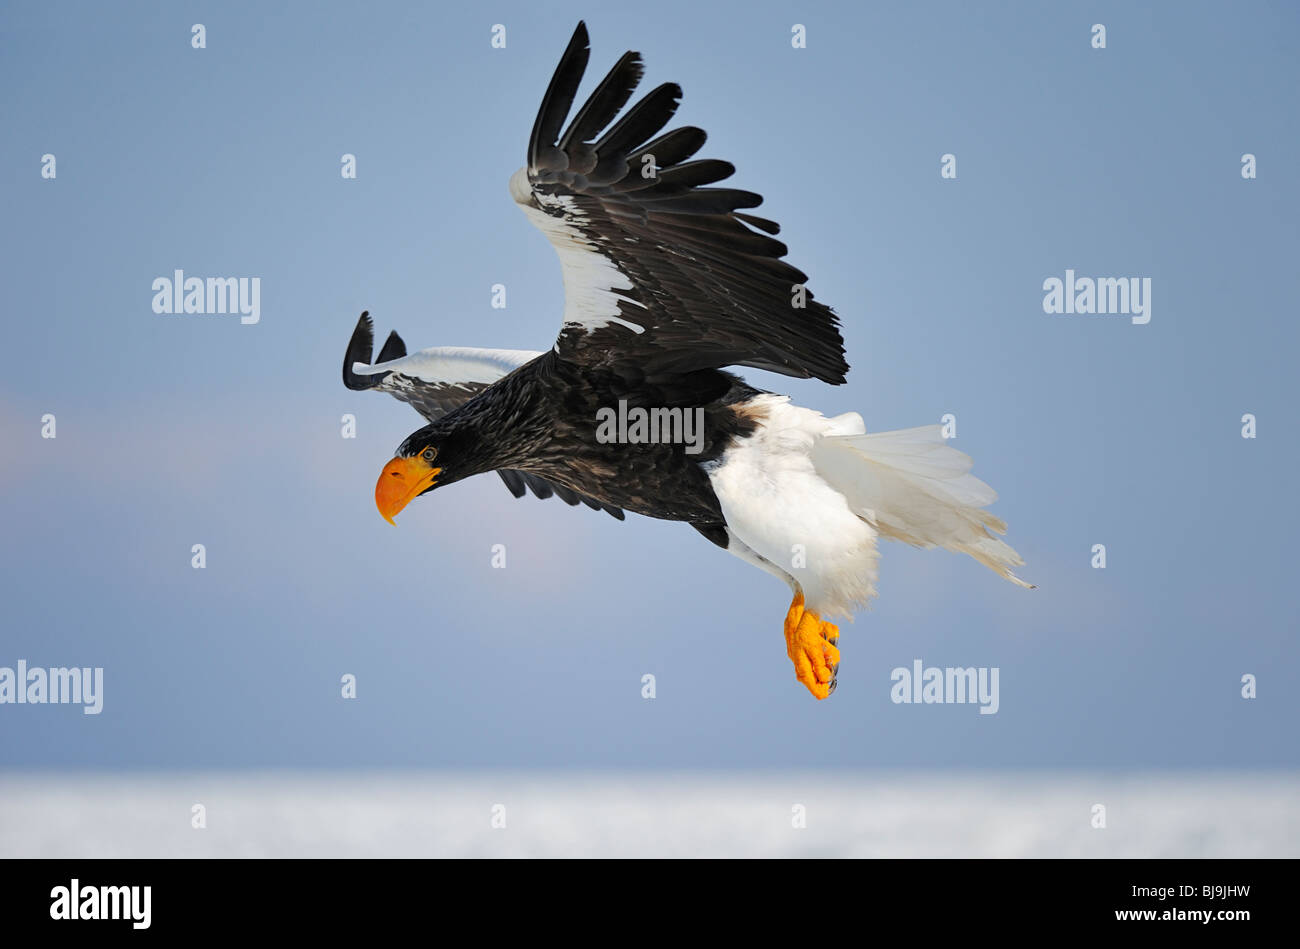 Steller's sea eagle hovering Stock Photo